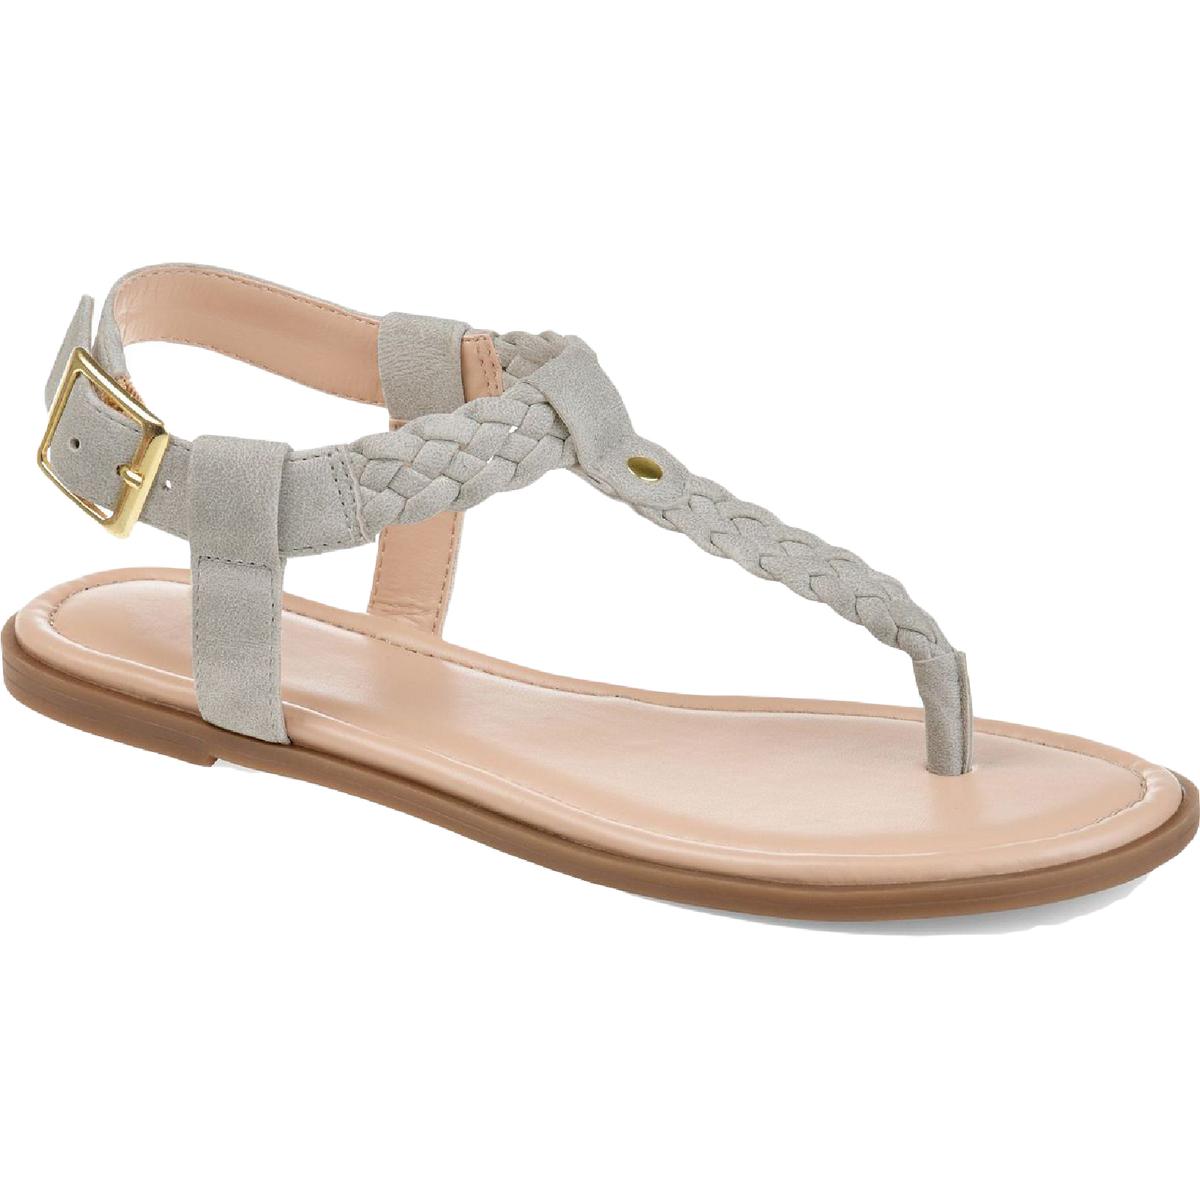 Journee Collection Genevive Womens Faux Leather Braided T-Strap Sandals